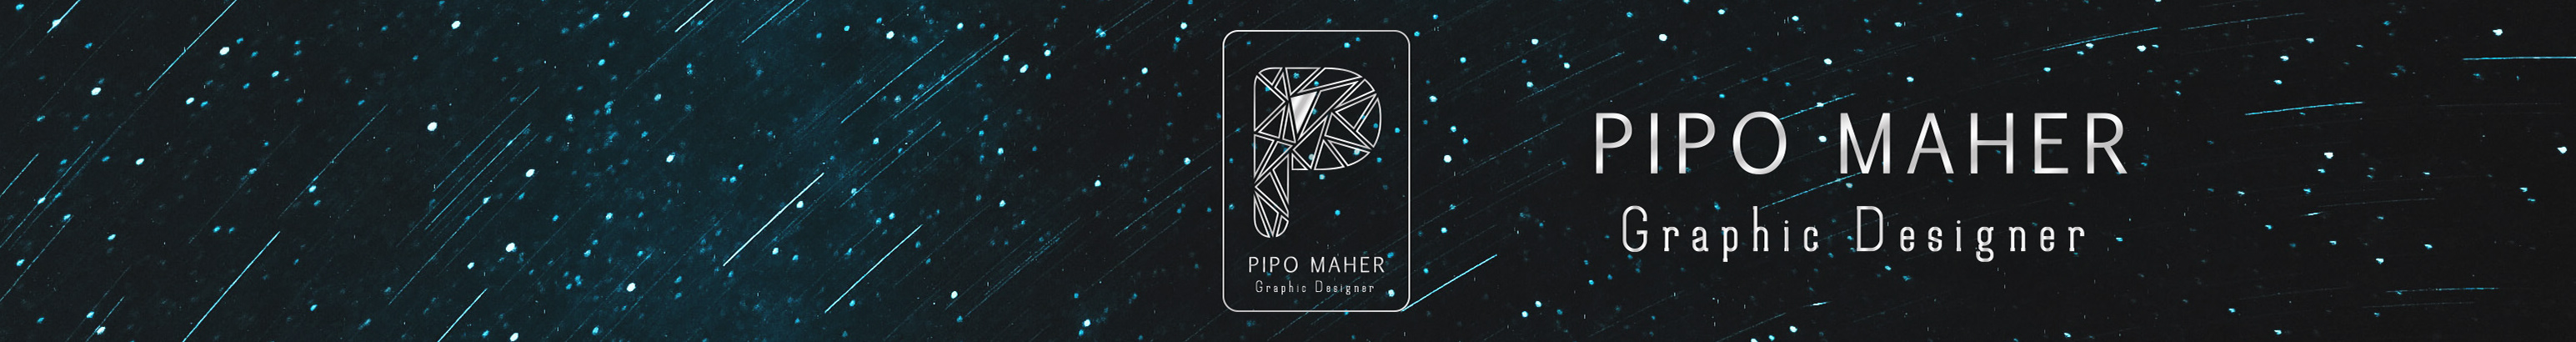 pipo mahers profilbanner